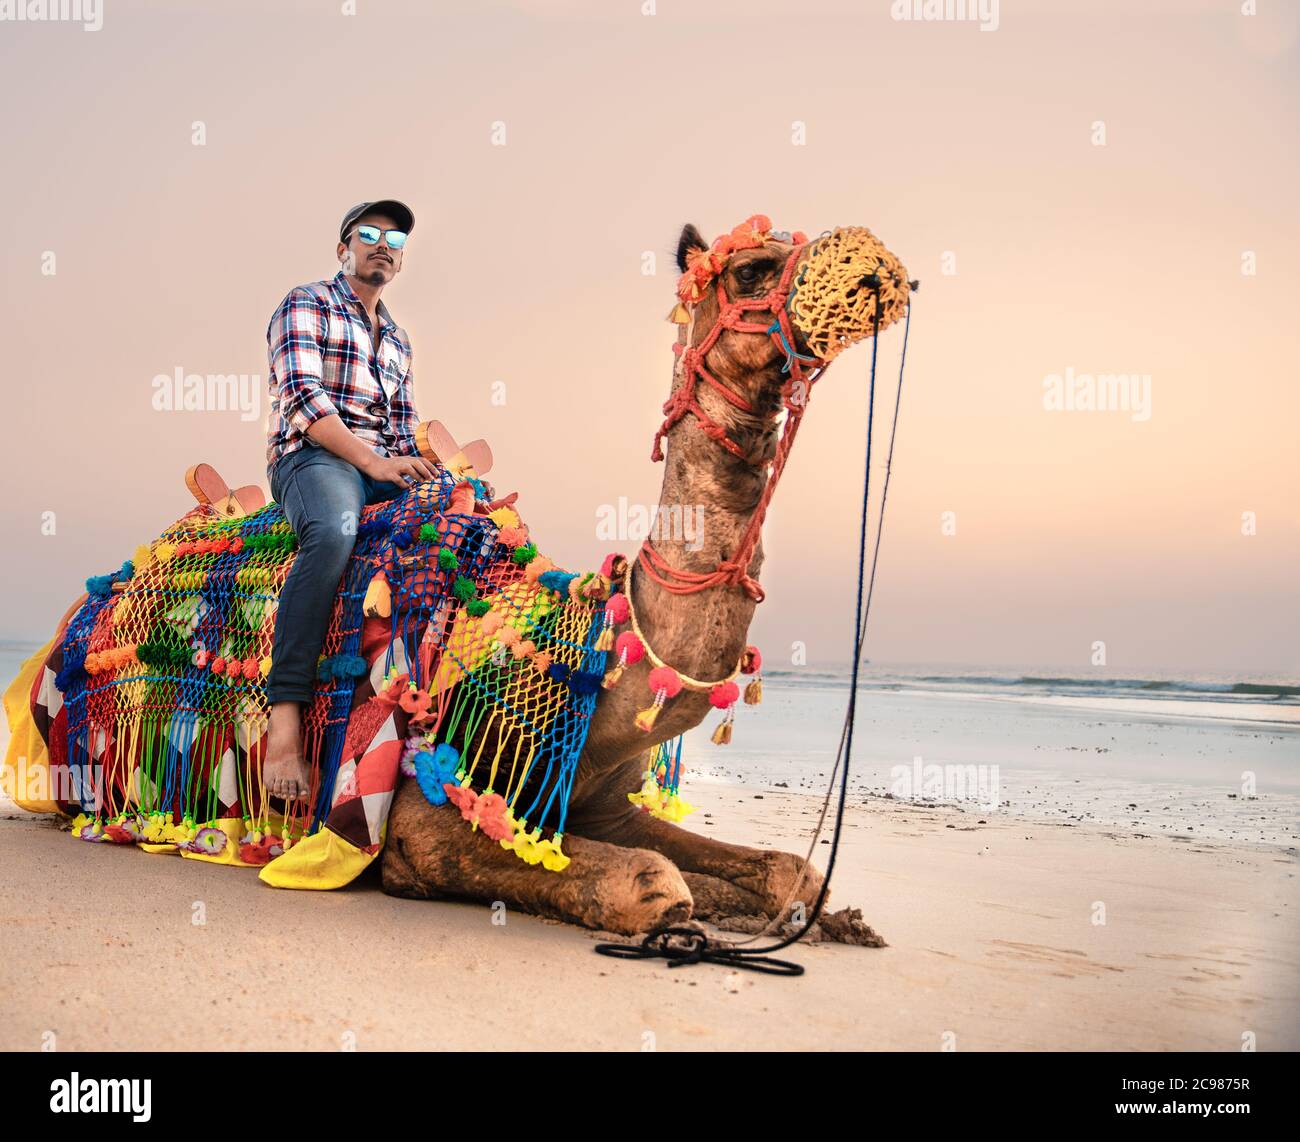 tourist with camel seating near indian beach while camel ride Stock Photo